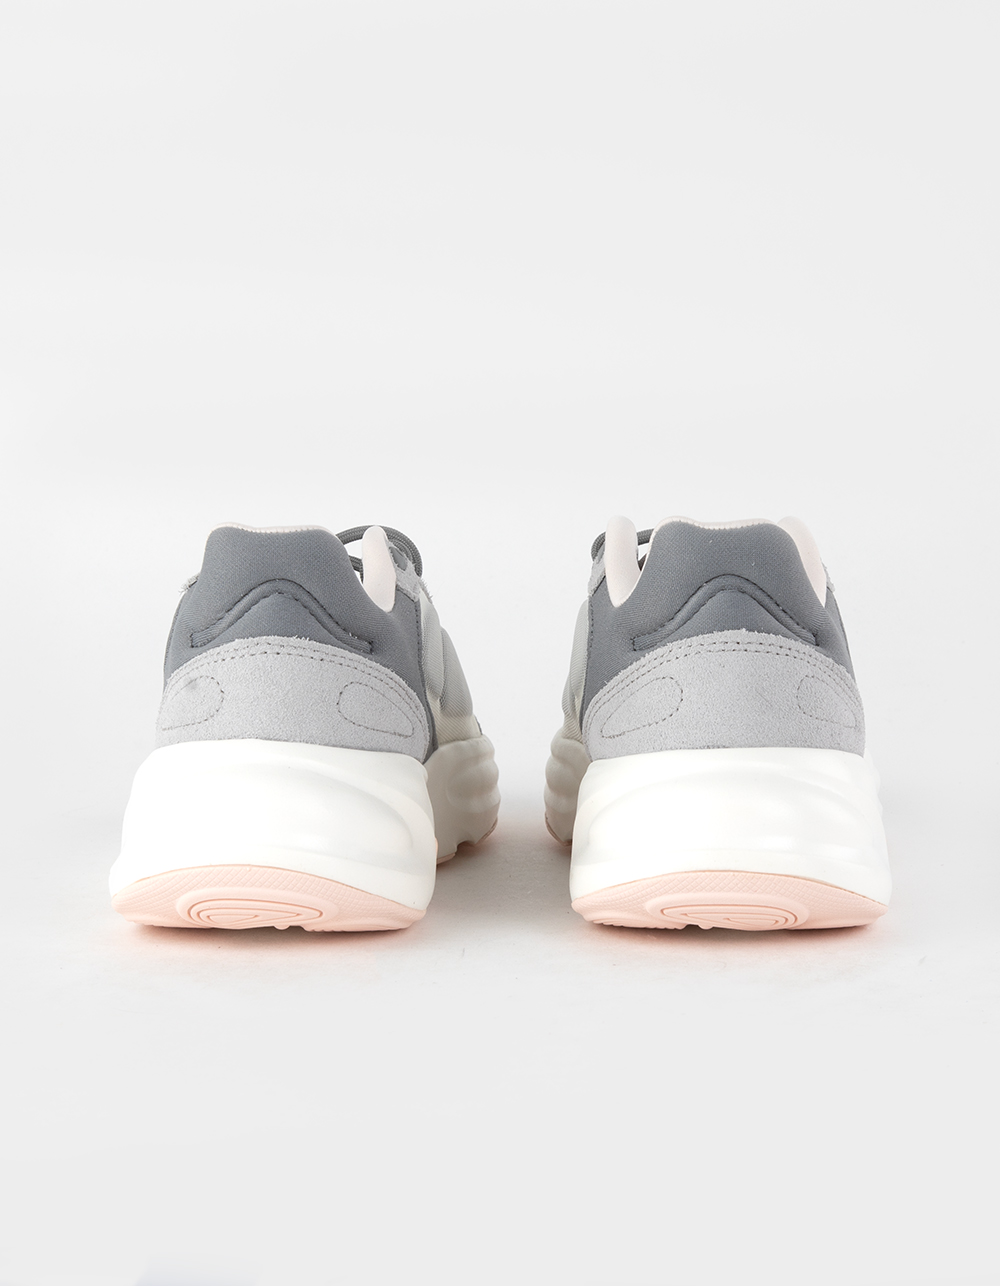 ADIDAS Ozelle Womens Shoes - GRAY | Tillys